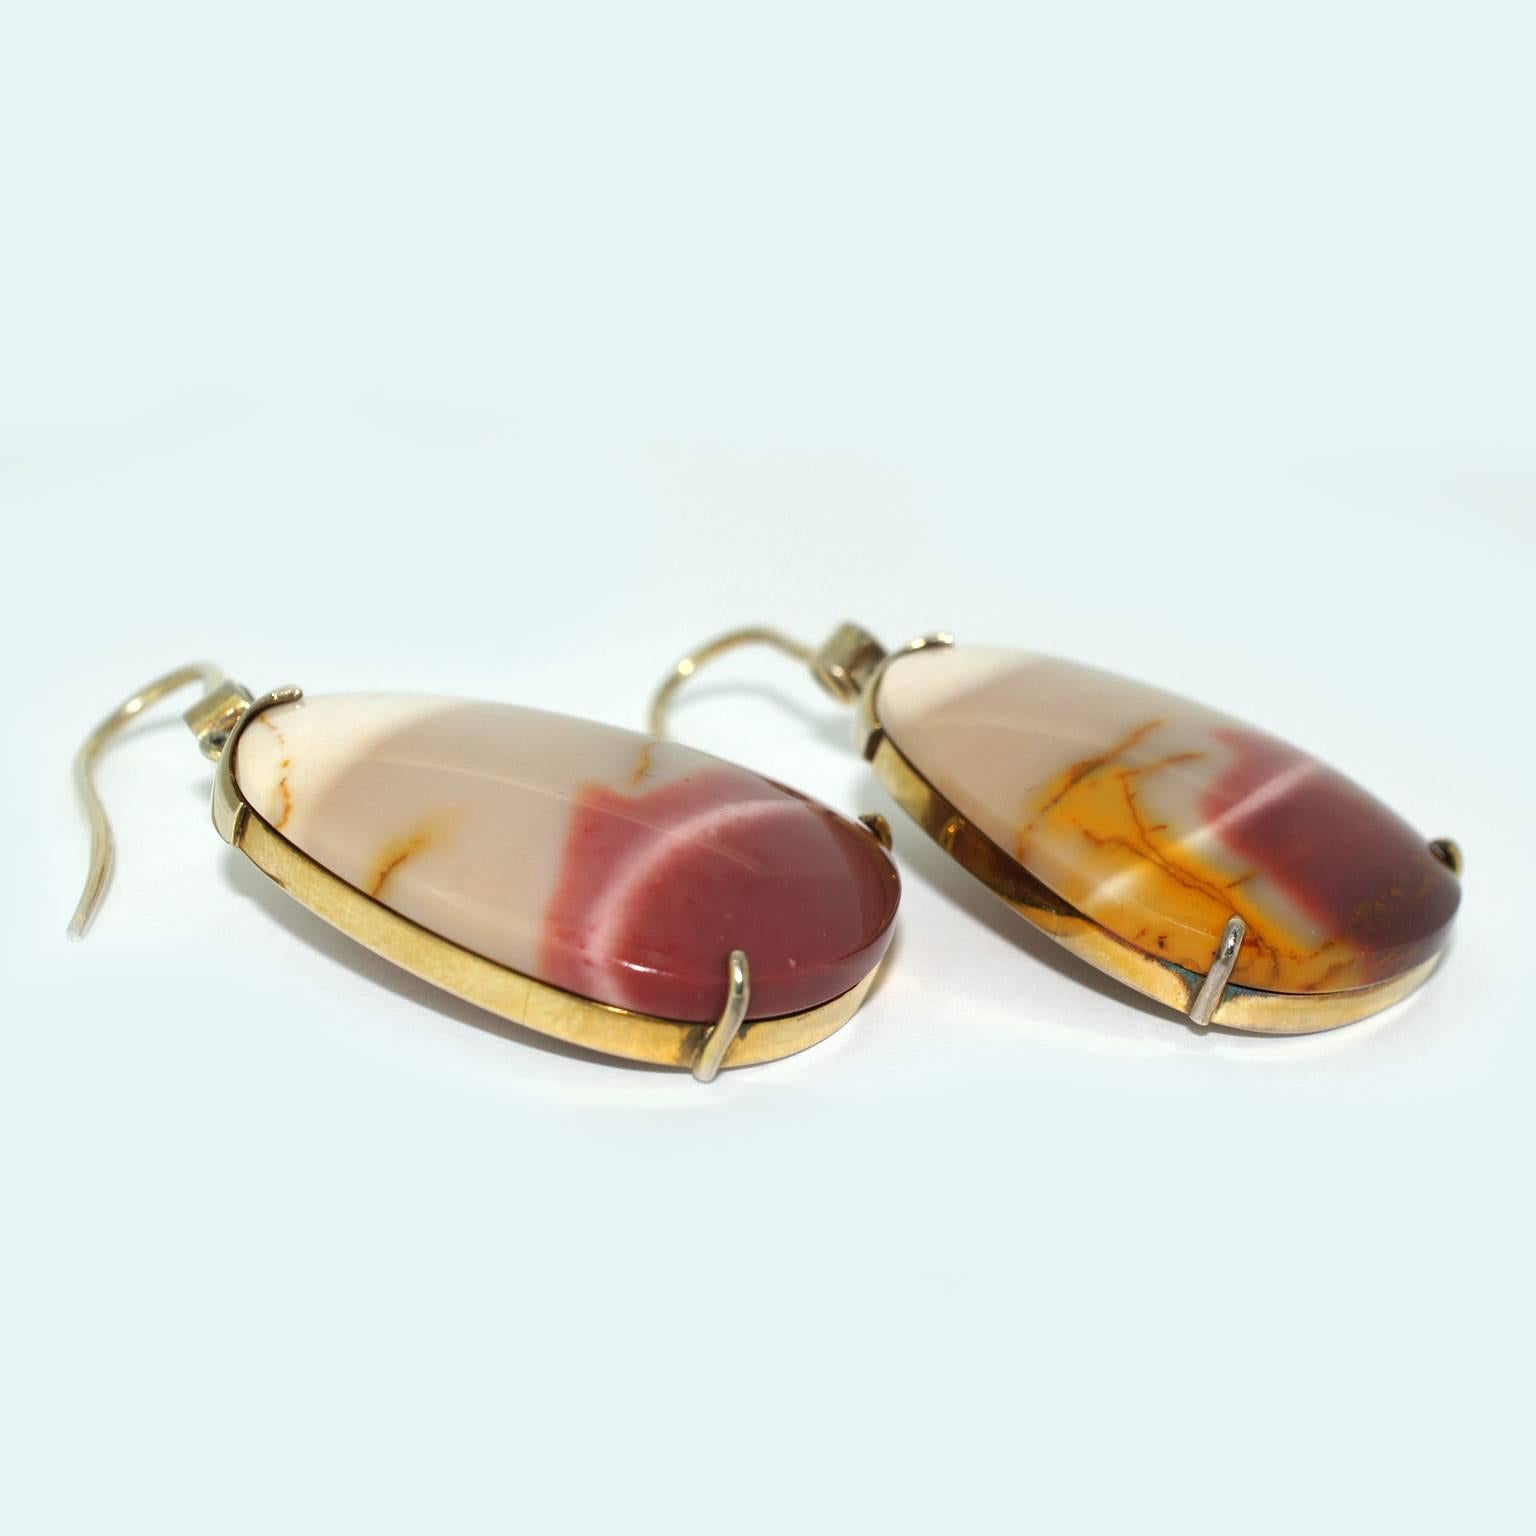 These one-of-a-kind earrings are handmade in Sydney in gold plated sterling silver and feature a pair of unique Australian Jasper gems and a pair of round brilliant cut champagne diamonds. Jasper is a form of Chalcedony, and this particular type of